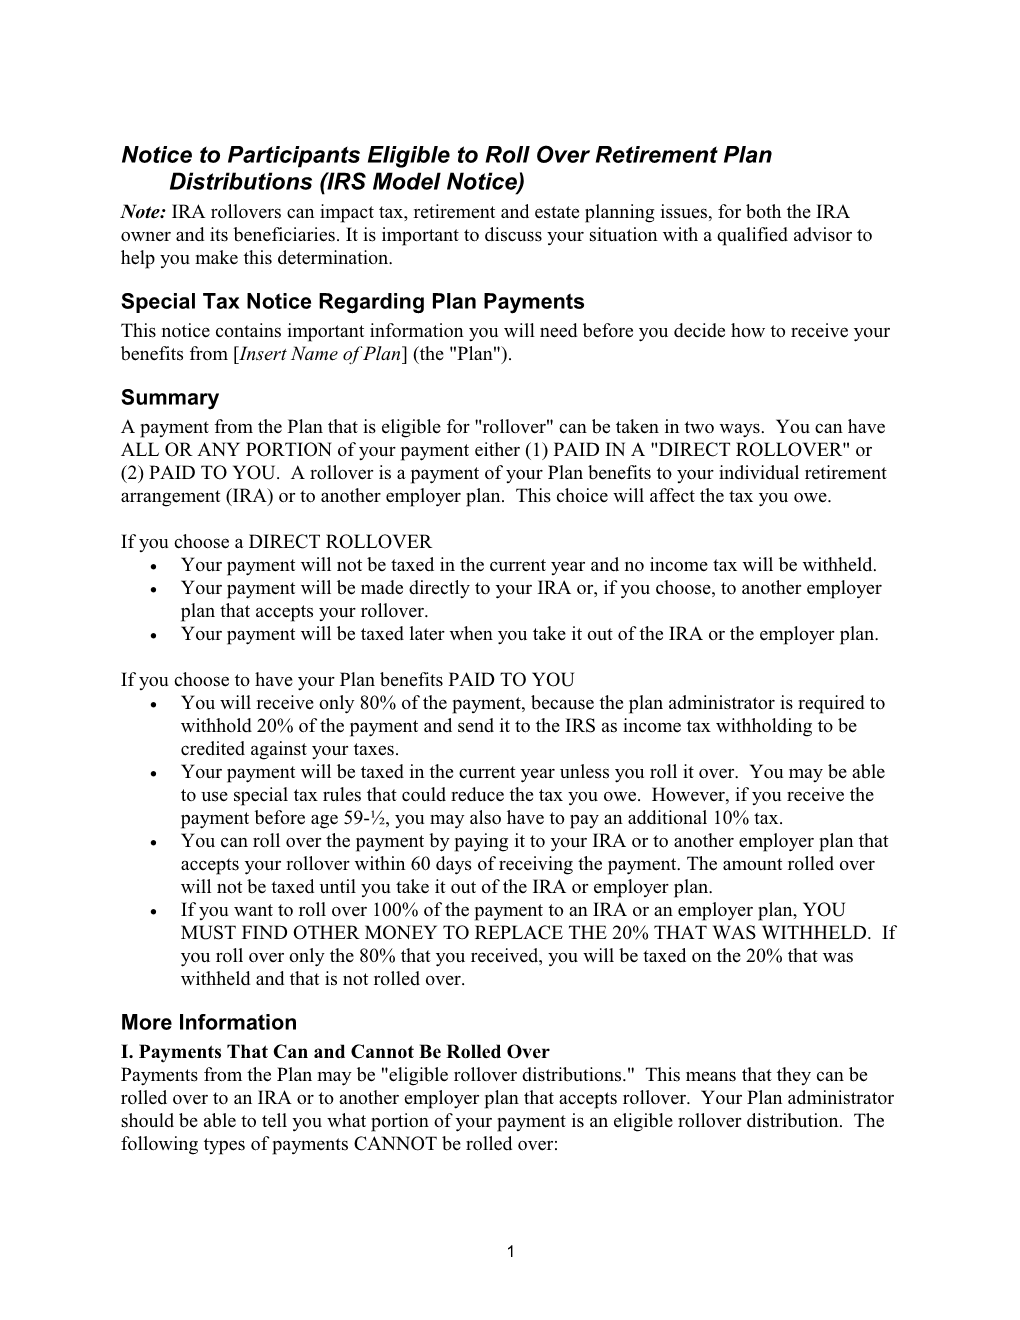 Notice to Participants Eligible to Roll Over Retirement Plan Distributions (IRS Model Notice)